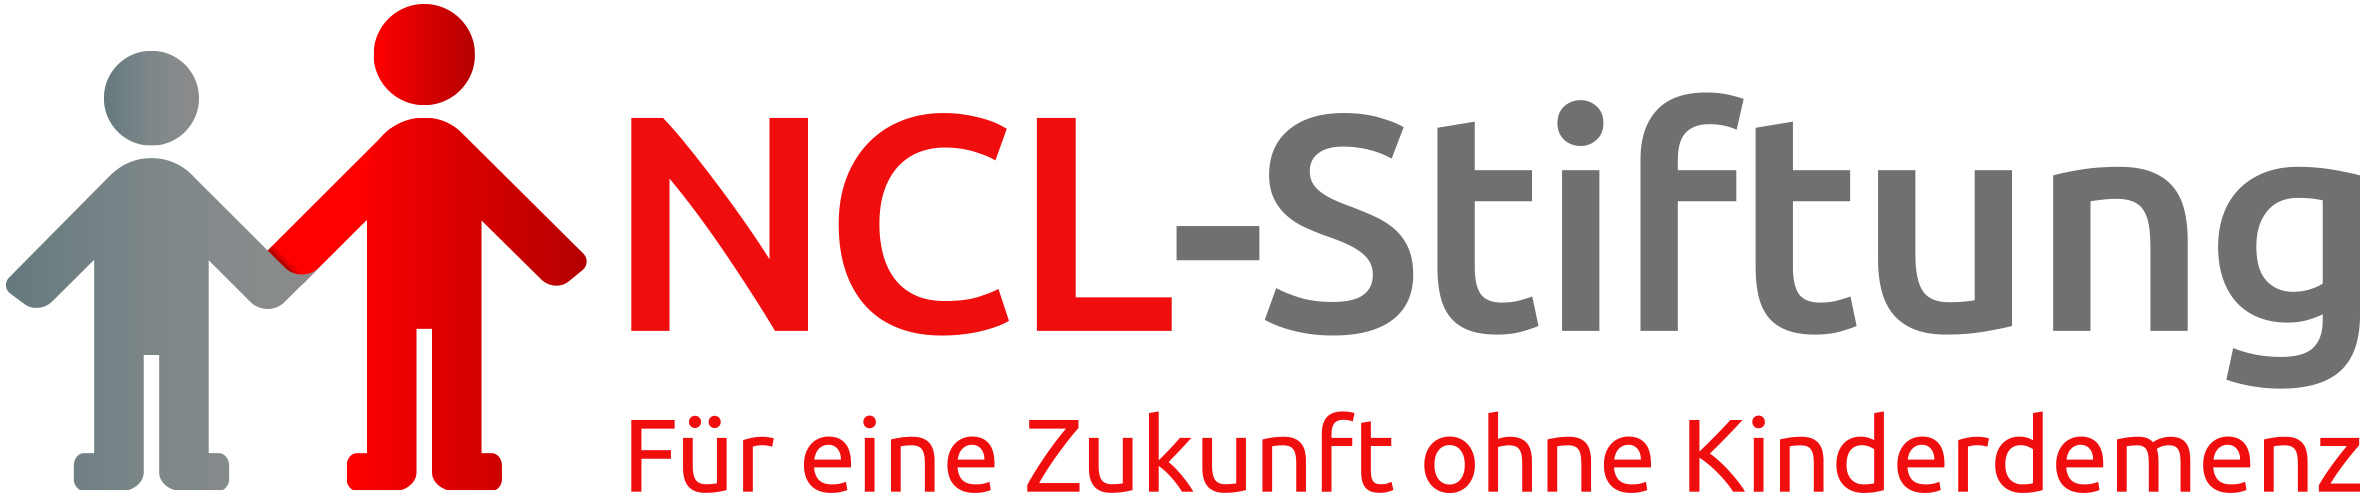 NCL Stiftung